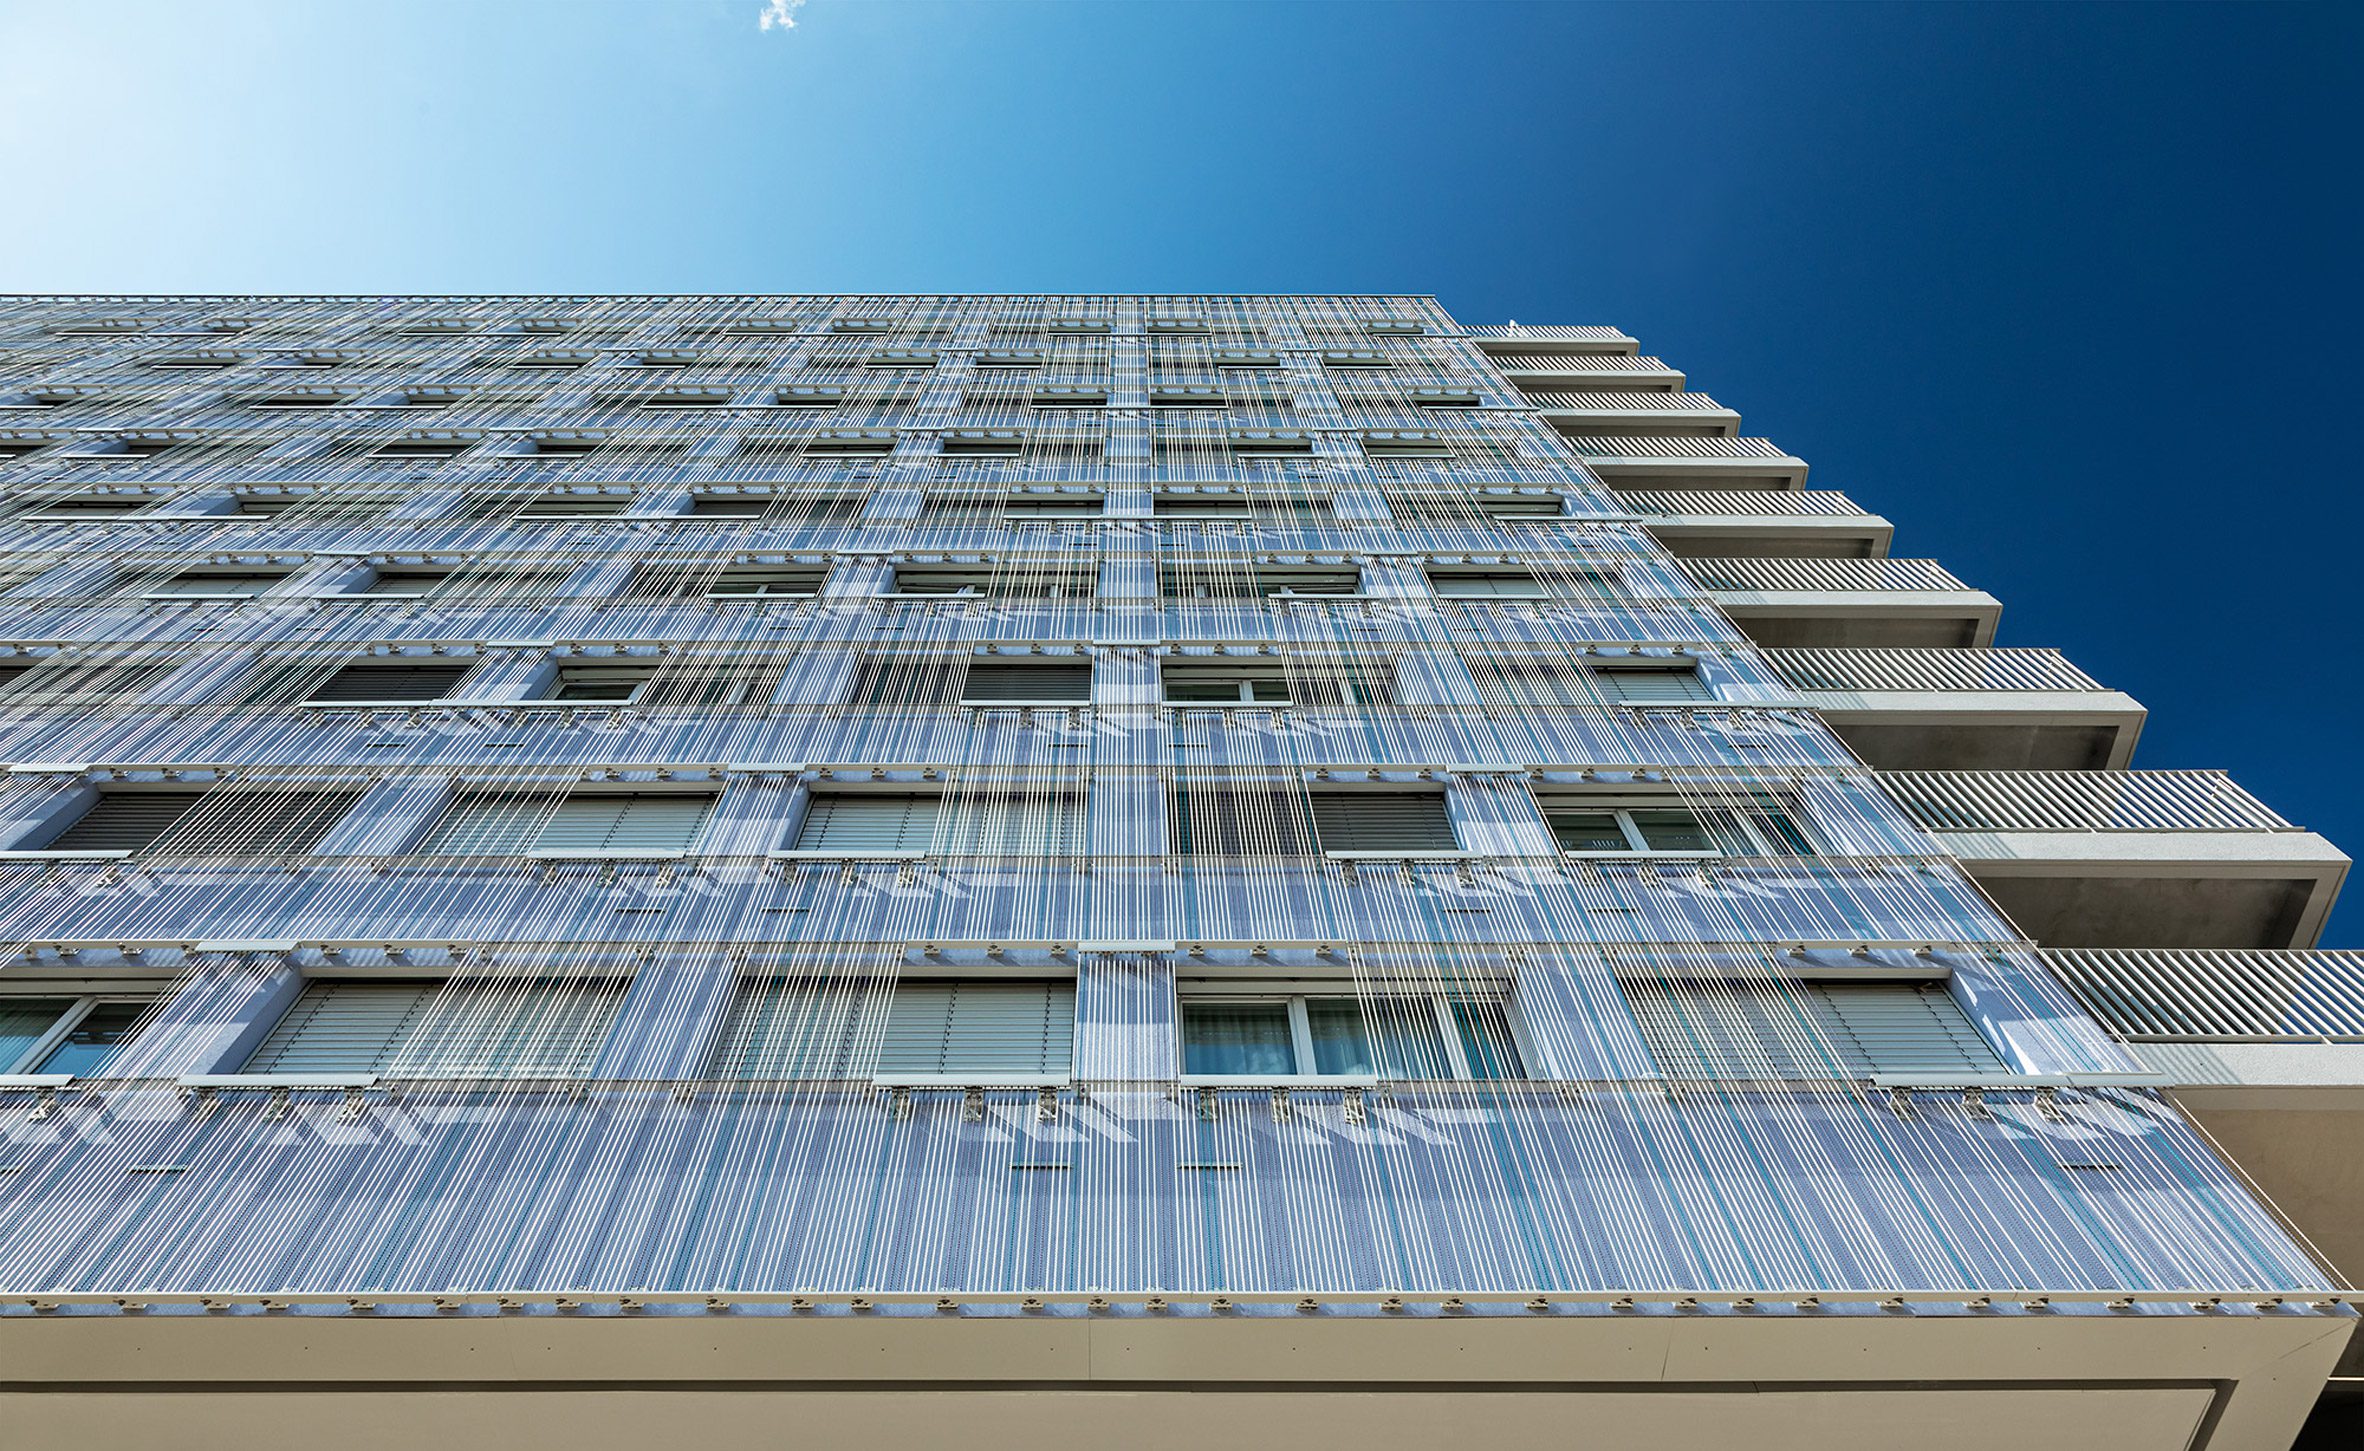 Close up image of the cladding of The Anémone Project in Montpellier, France